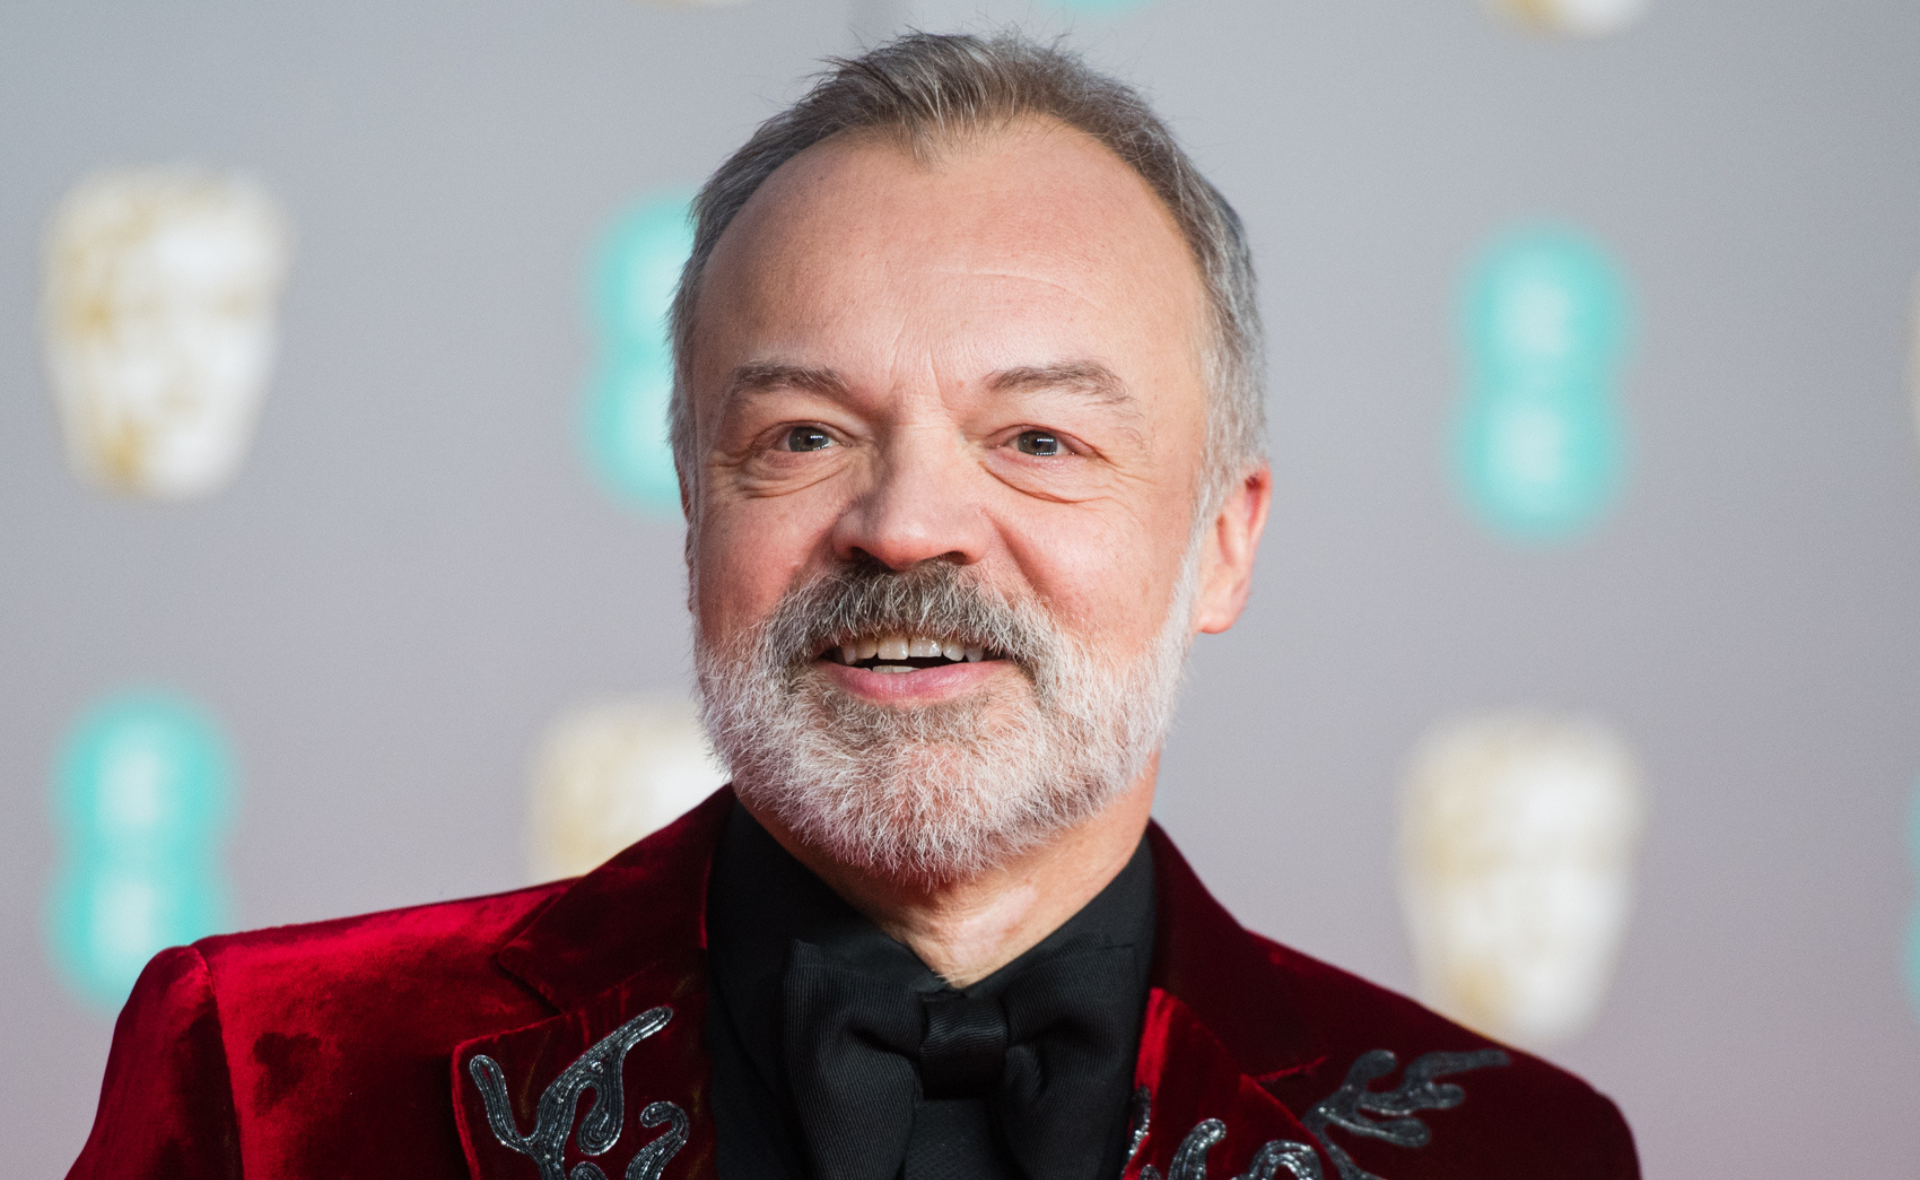 Iconic chat show host Graham Norton opens up about his new novel, his “surprising” marriage and why he doesn’t want children